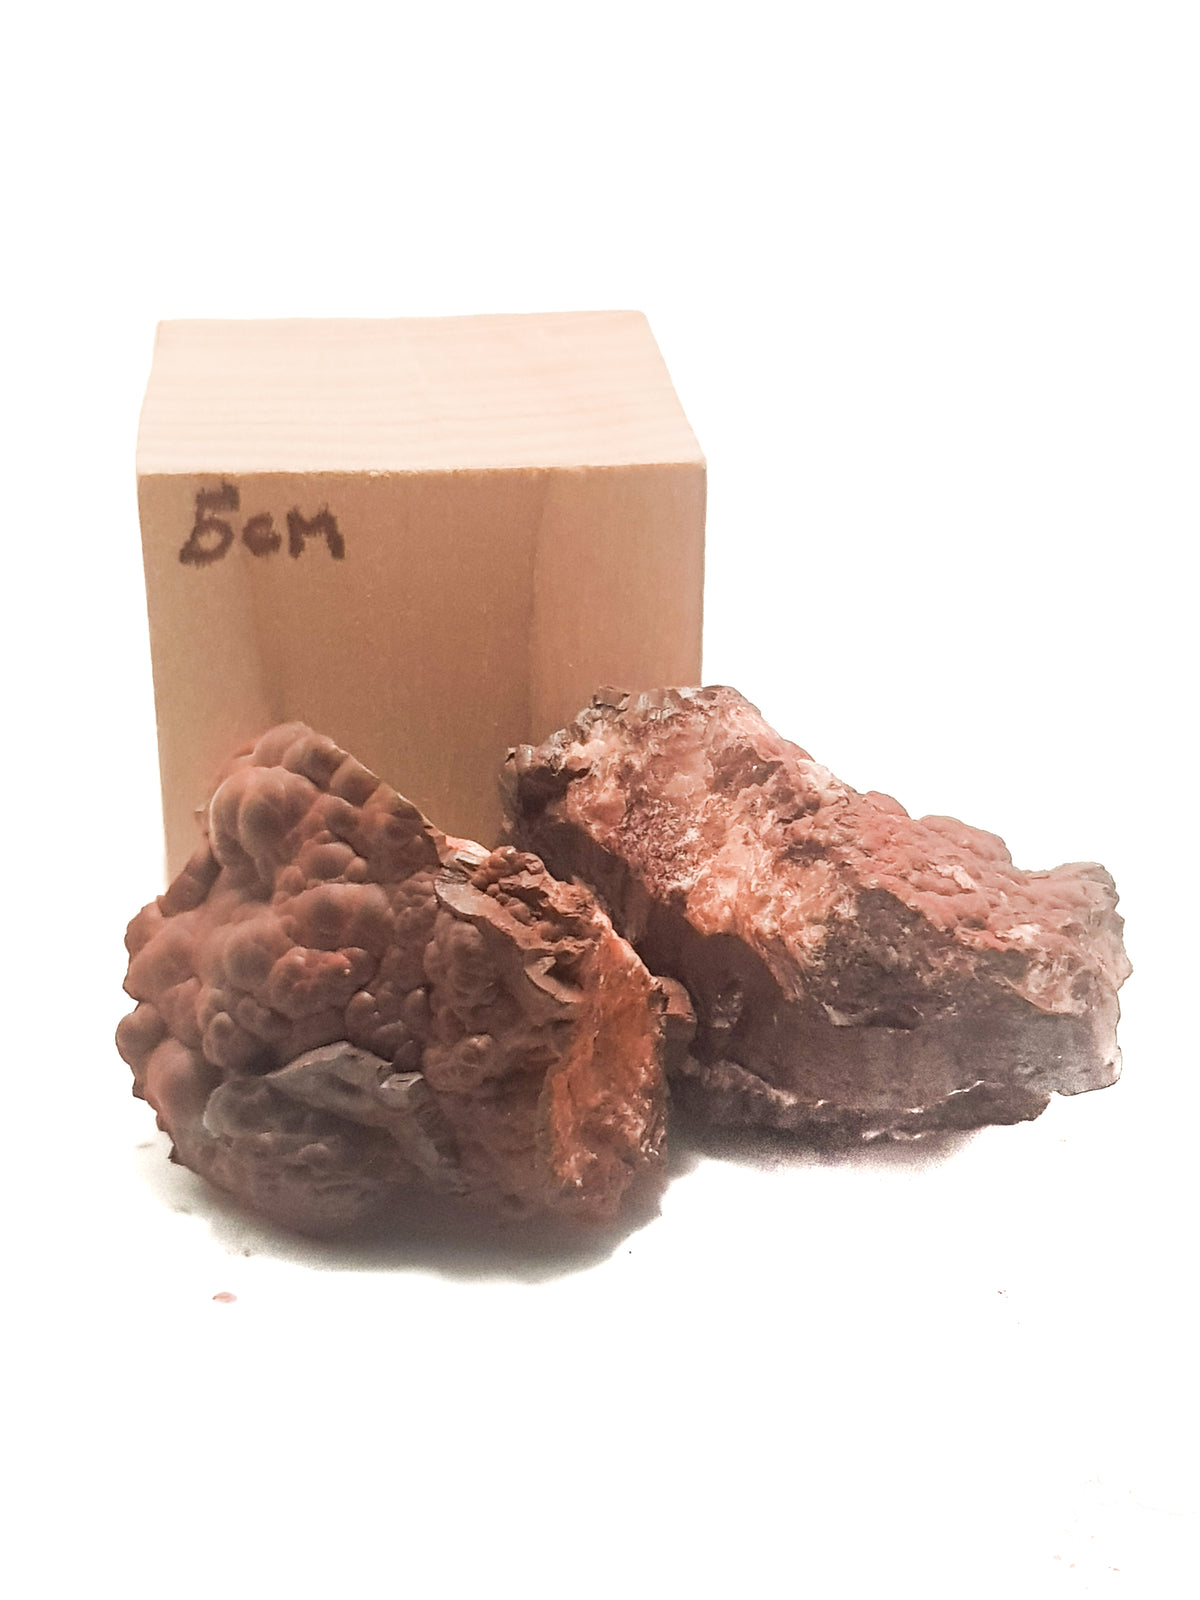 two samples of raw bottroydial hematite. One sample shows the bubbly surface, the other sample shows that the bubbles are layered when cut through. The samples are next to a wooden cube which states that it is 5cm. It is given for scale.